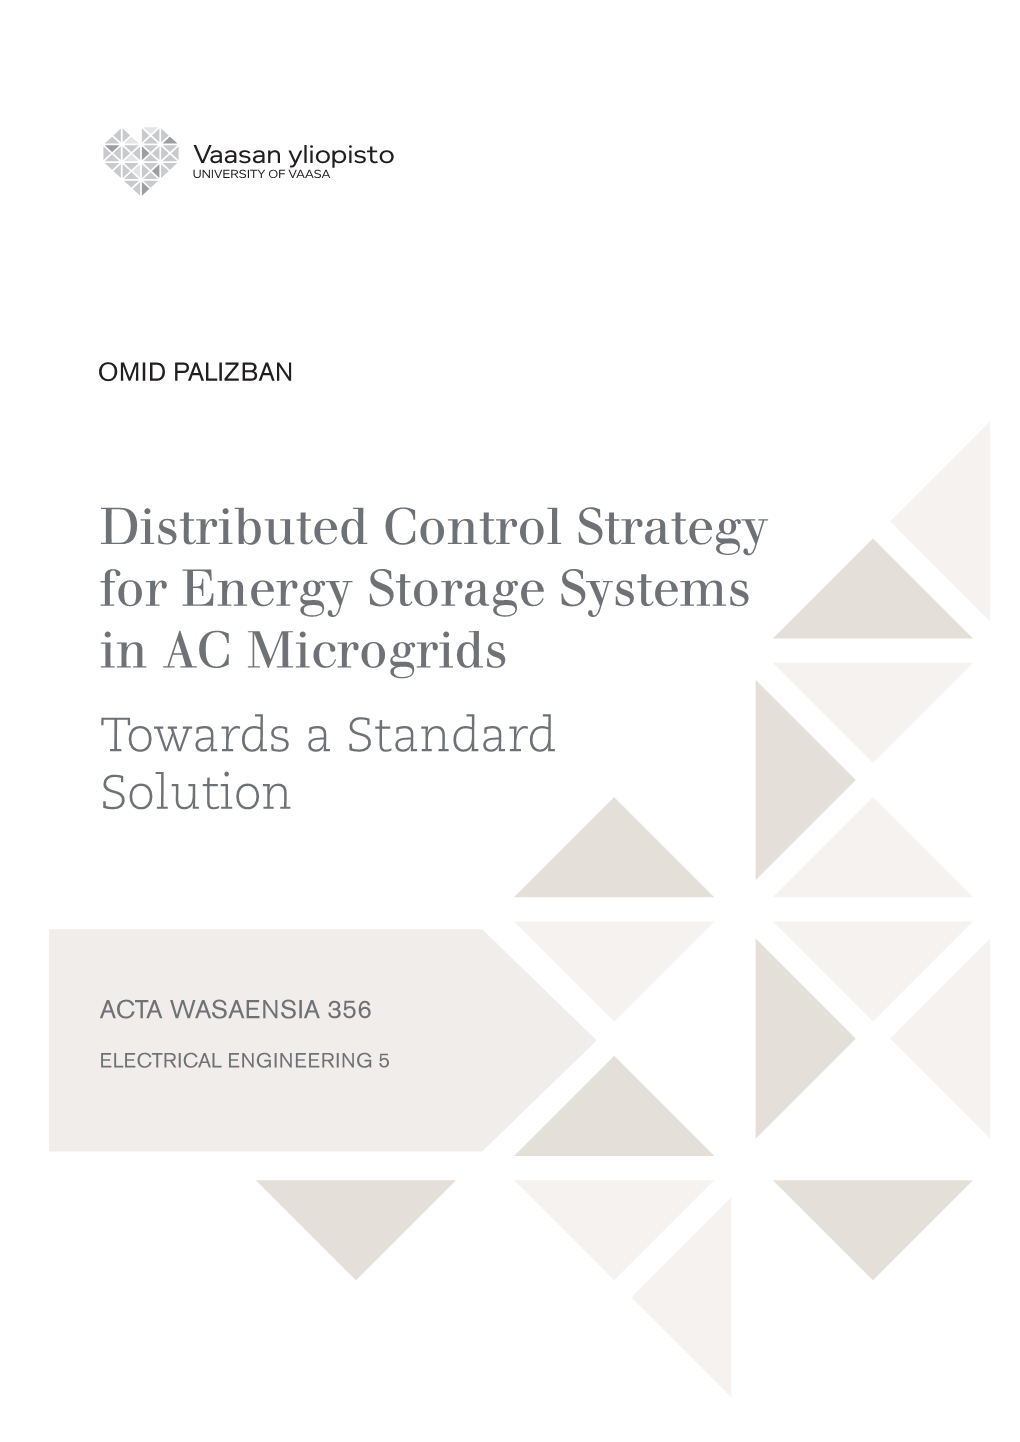 Distributed Control Strategy for Energy Storage Systems in AC Microgrids Towards a Standard Solution